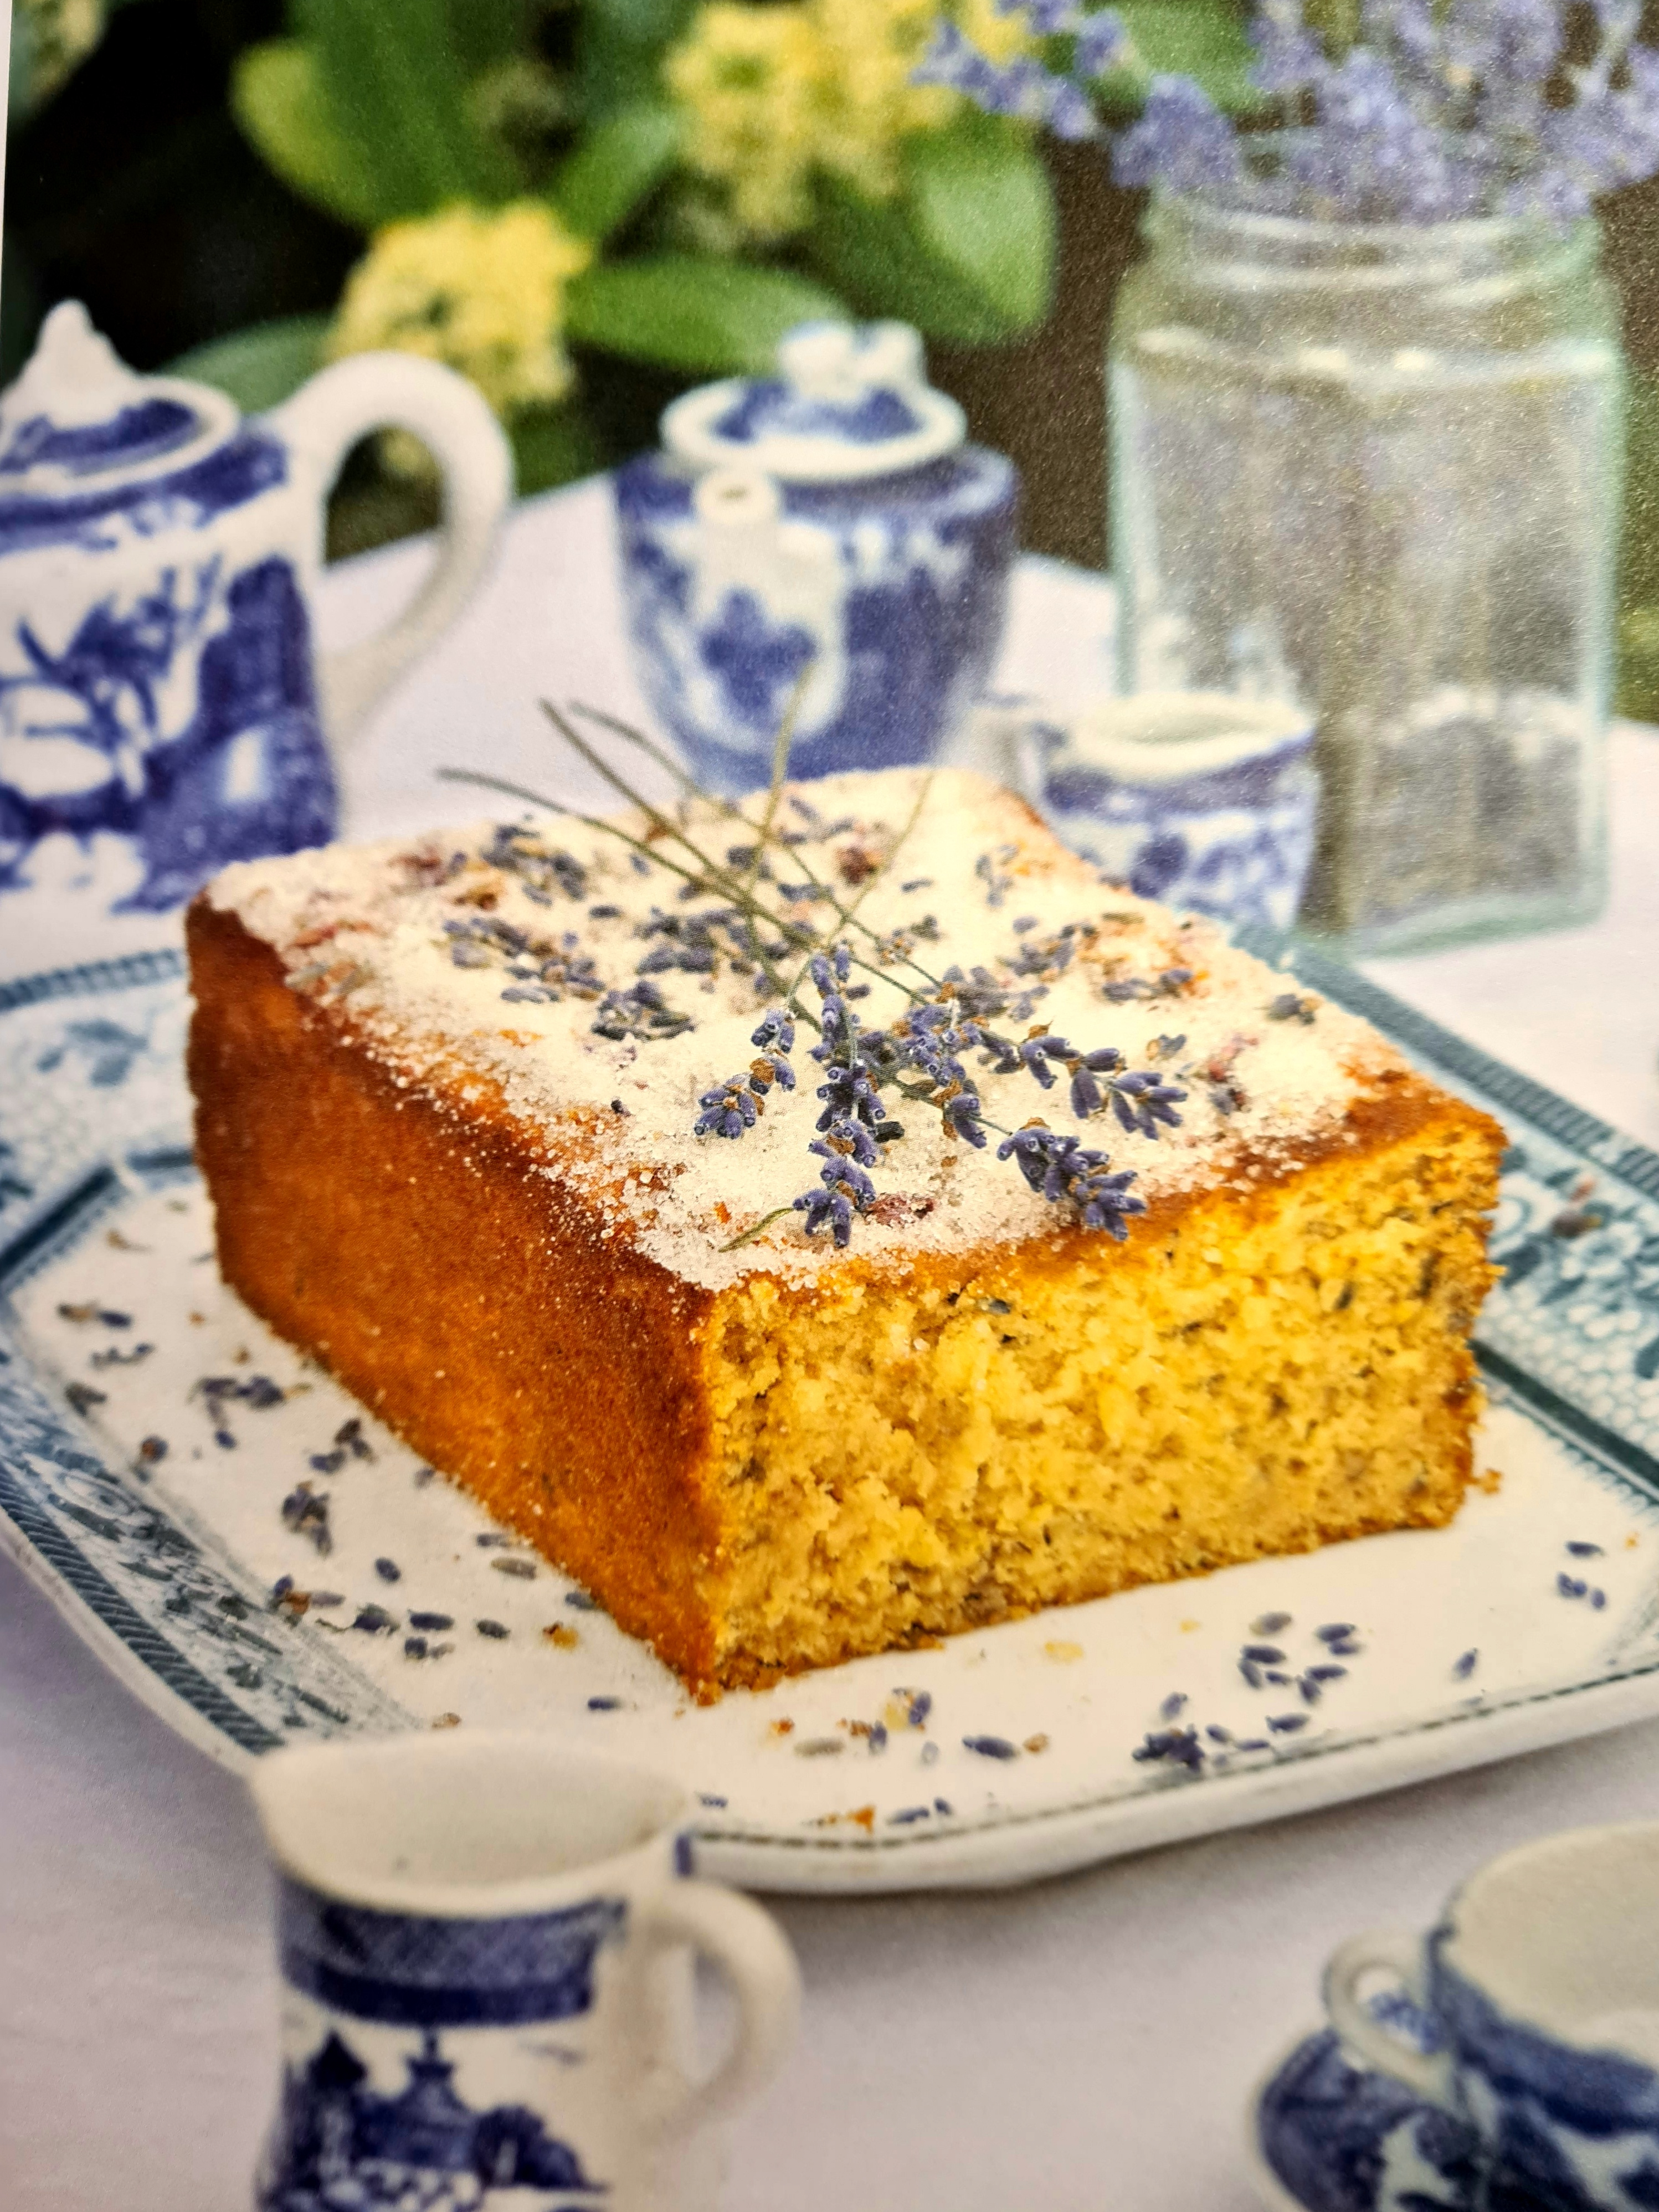 Photograph of Lemon and Lavender Drizzle Cake, from Red Velvet Chocolate Heartache by Harry Eastwood, published by Bantam Press, 2009.